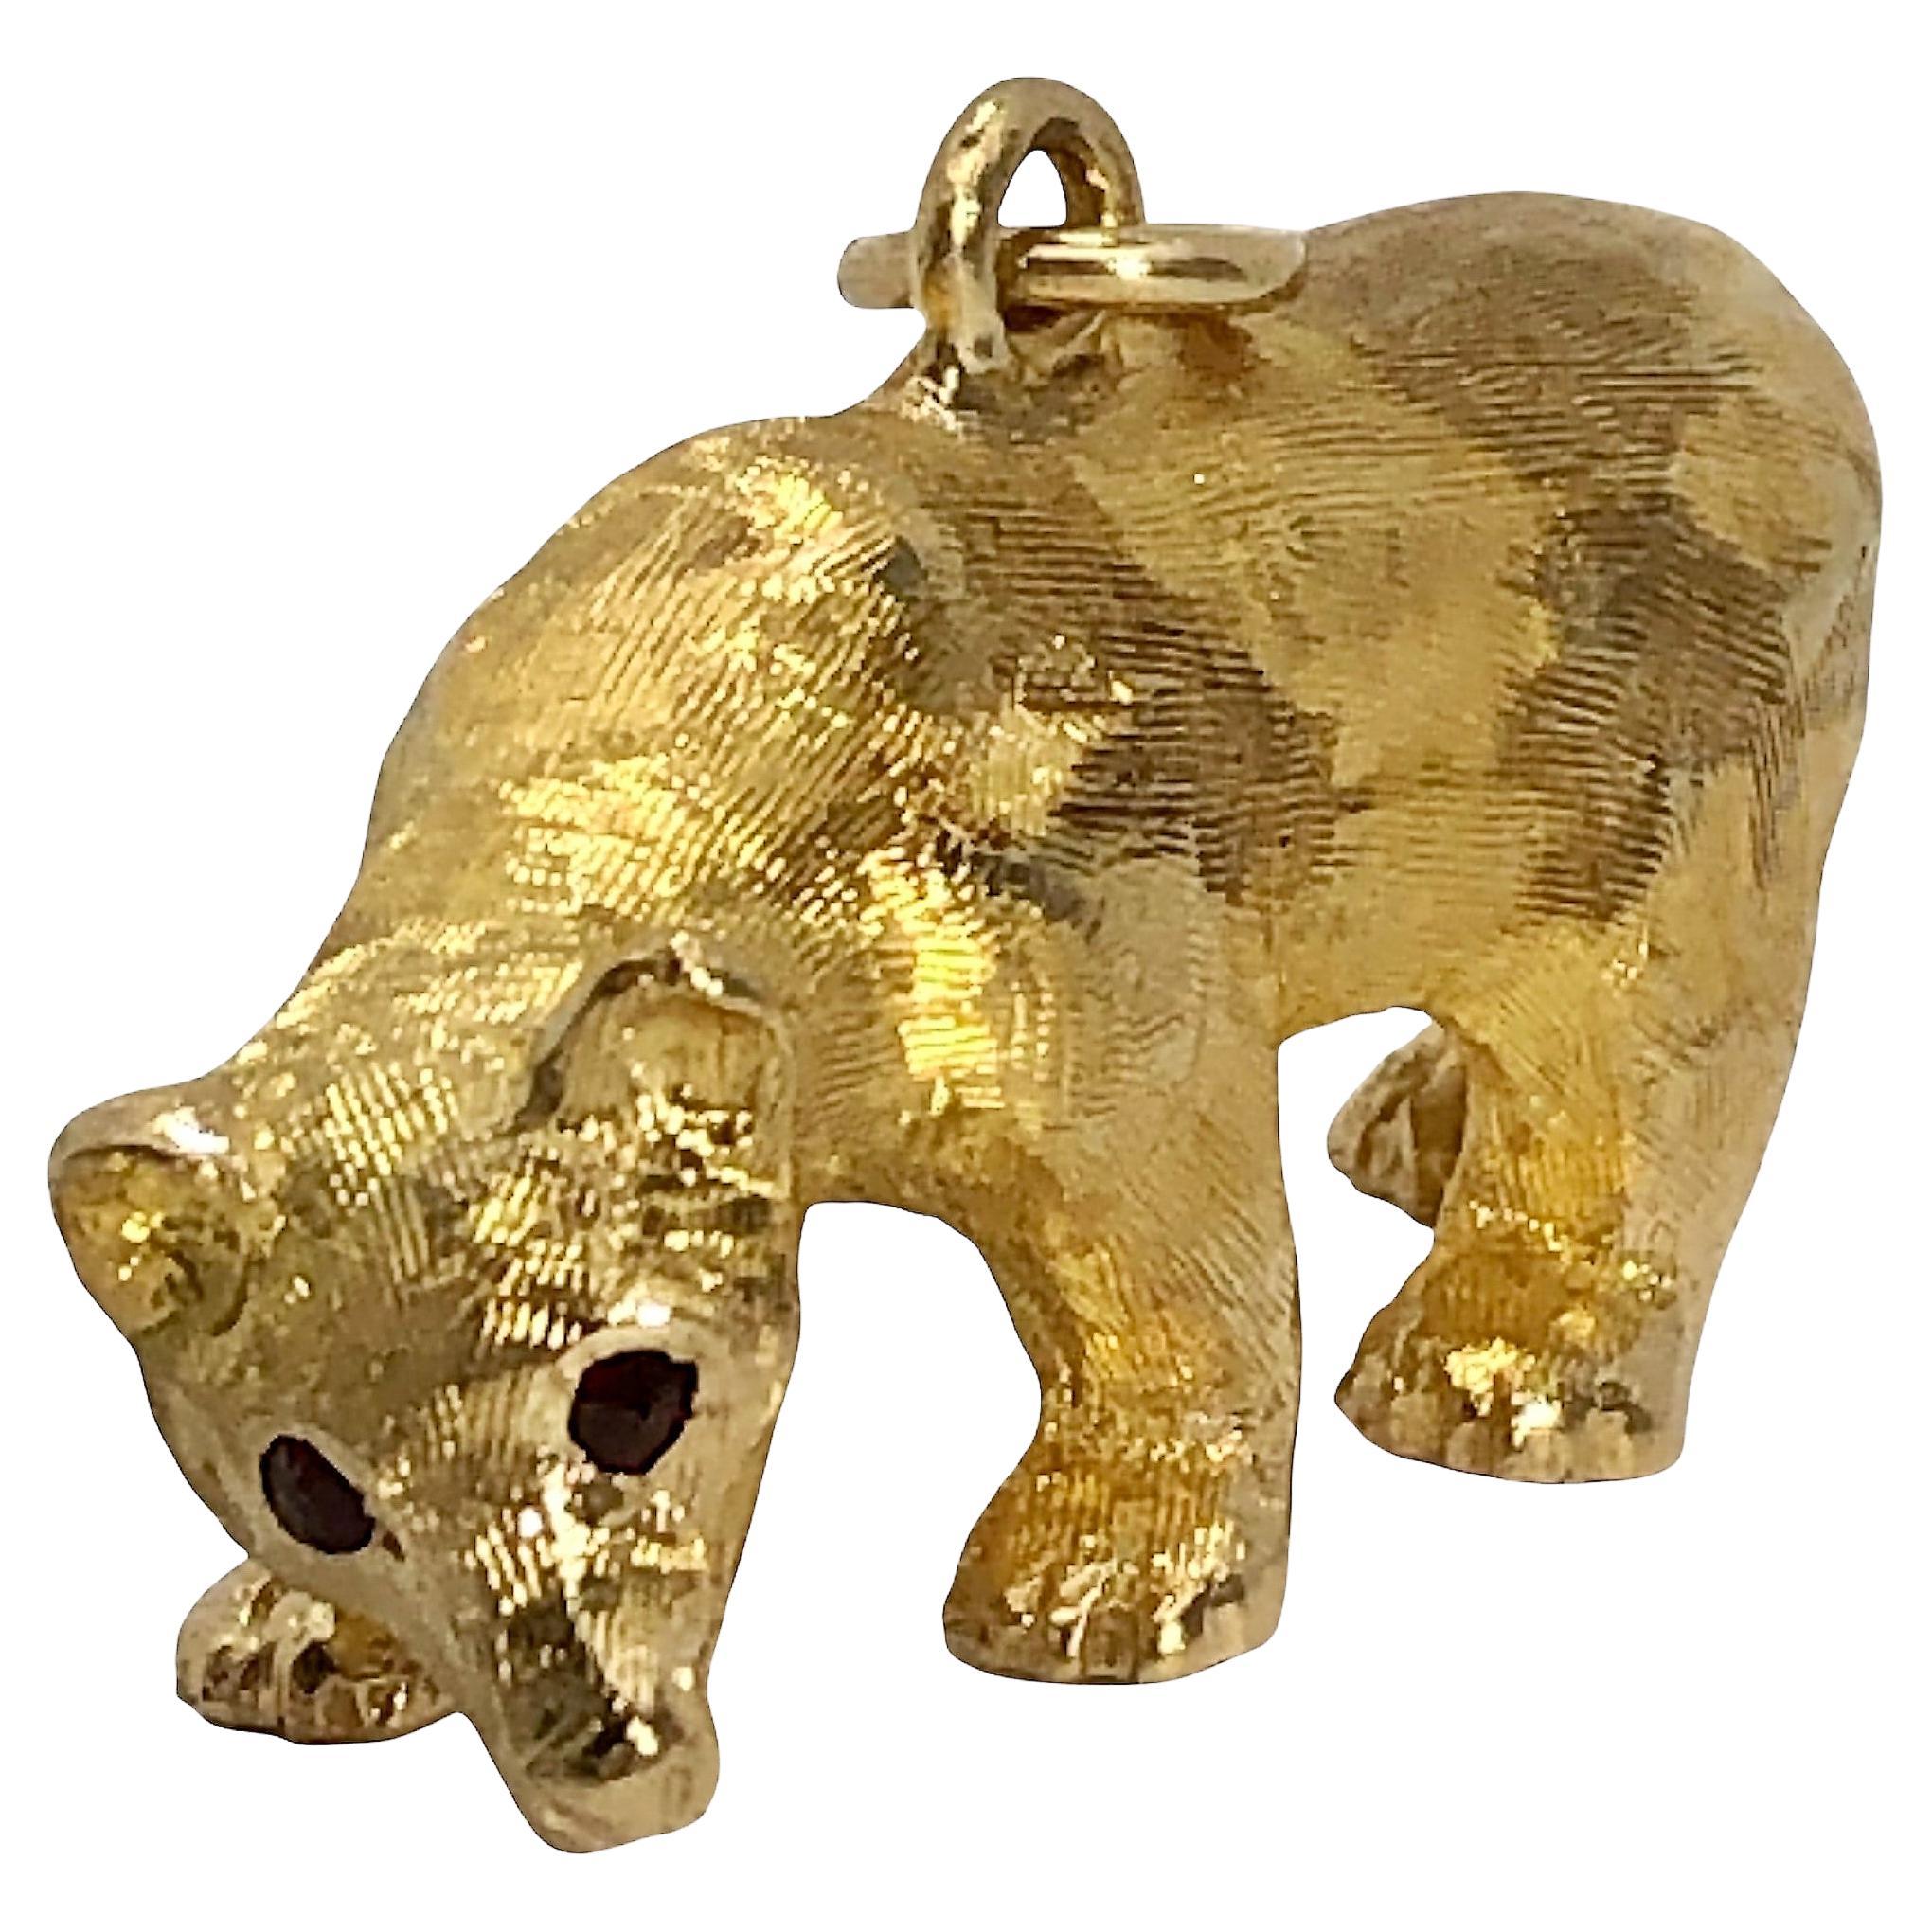 Lifelike 14K Yellow Gold Bear Pendant with 24K Gold Wash and Garnet Eyes For Sale